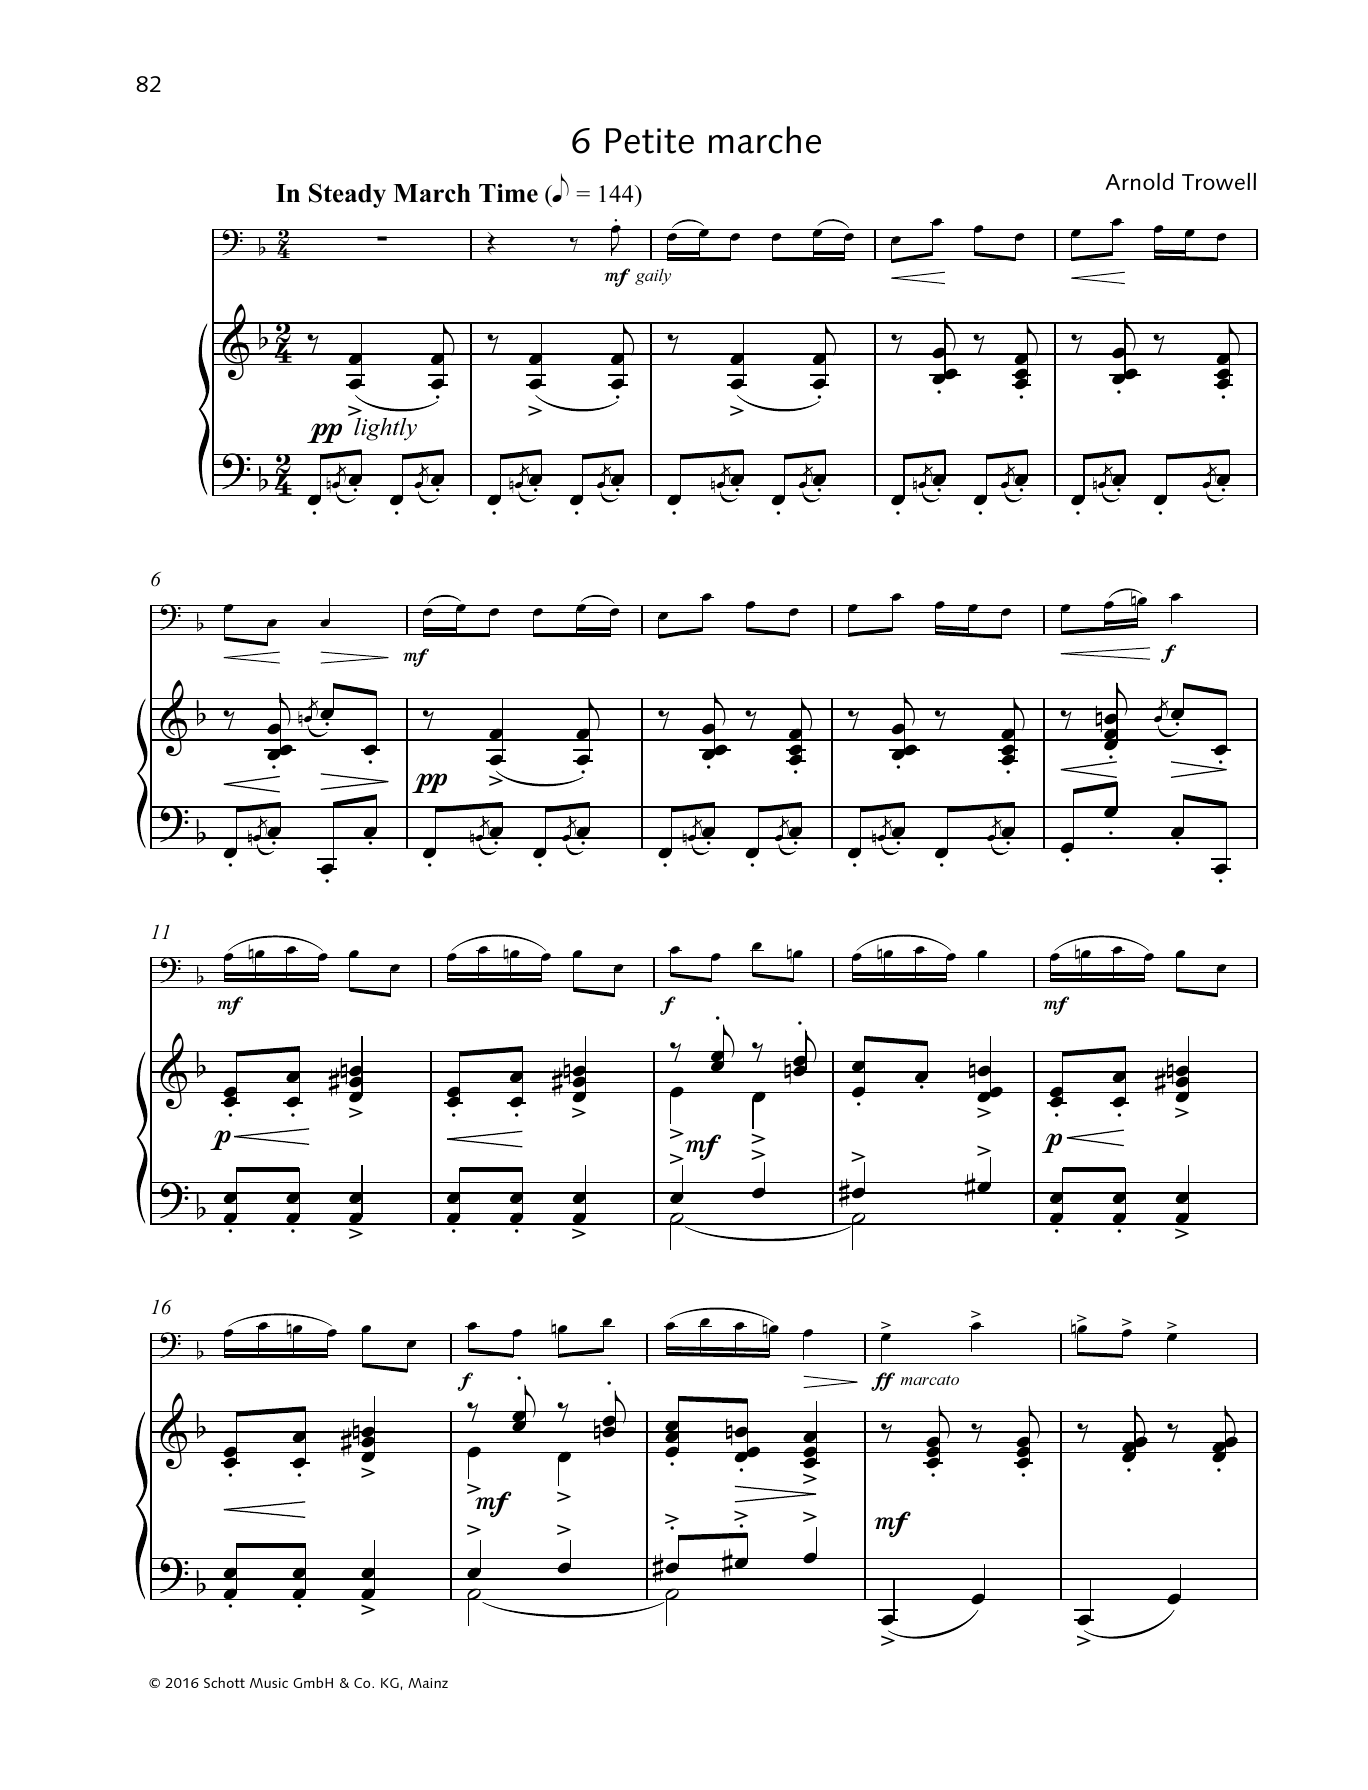 Download Arnold Trowell Petite marche Sheet Music